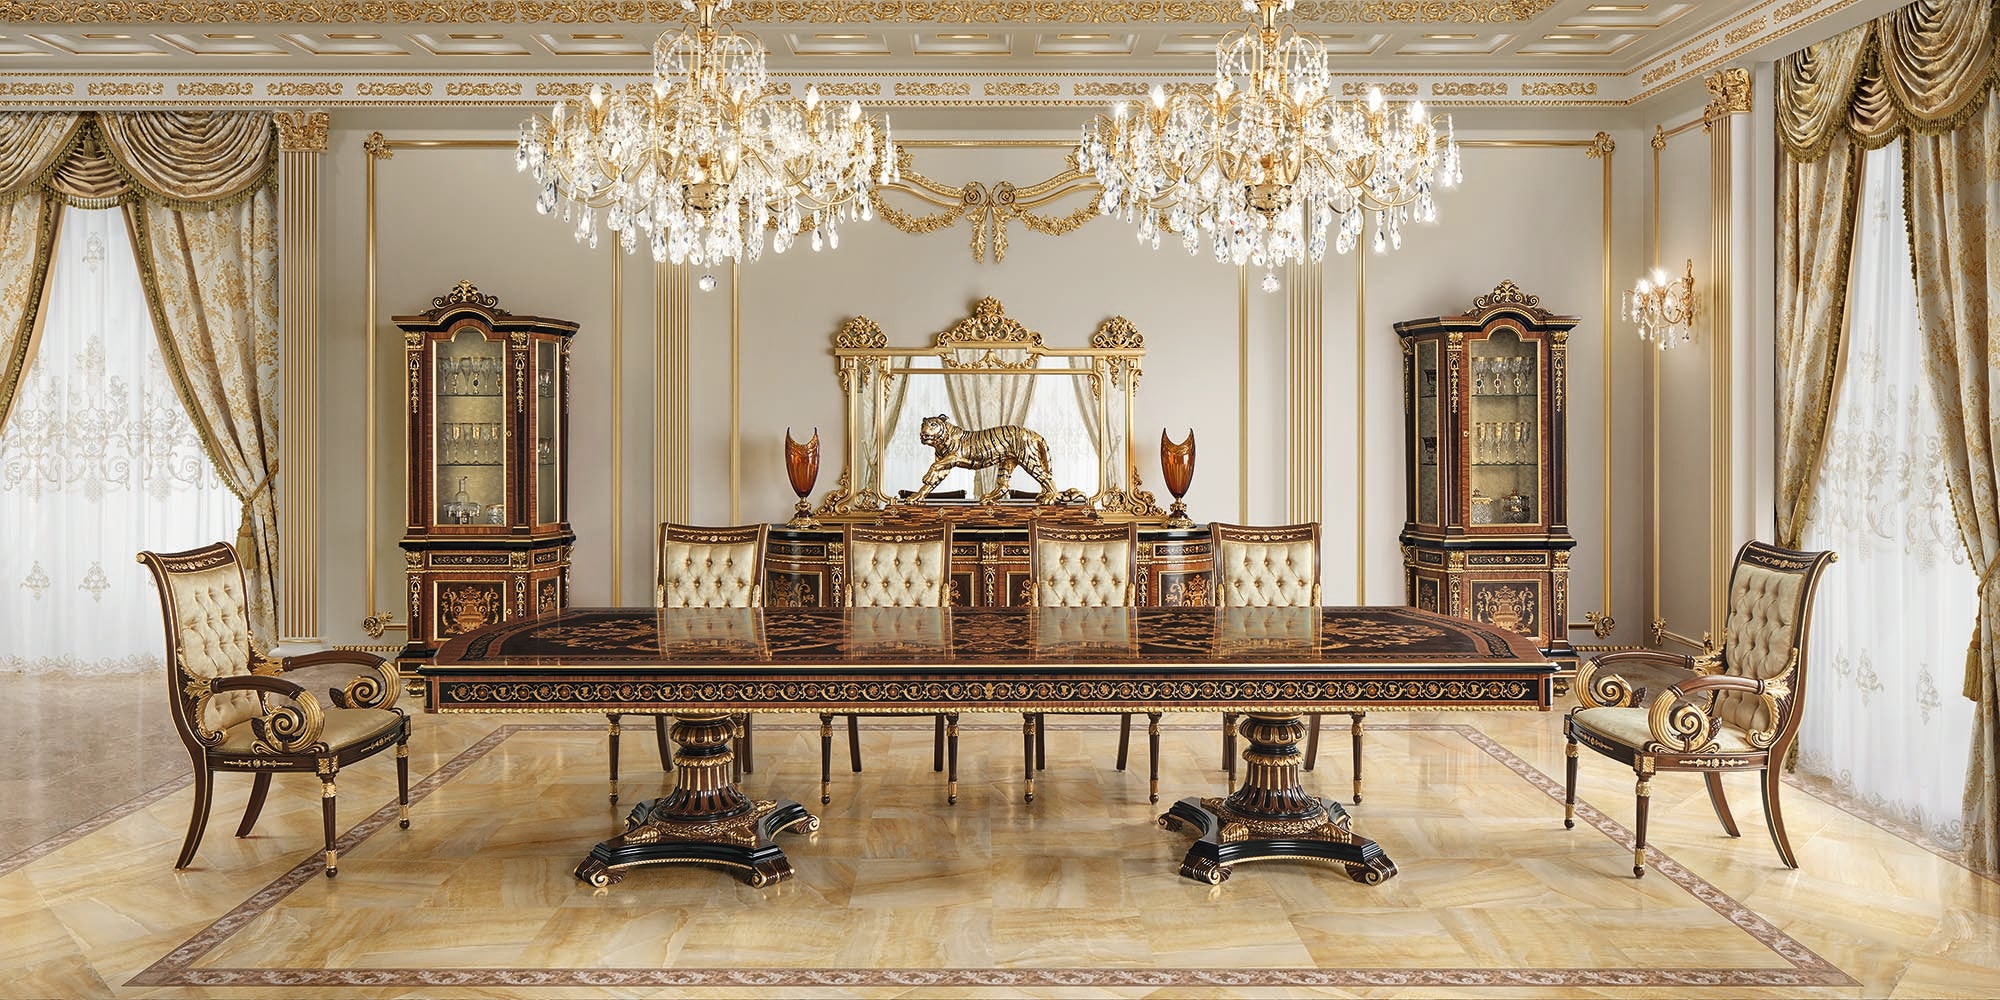 The Art of Italian Furniture: Combining Luxury and Solid Wood